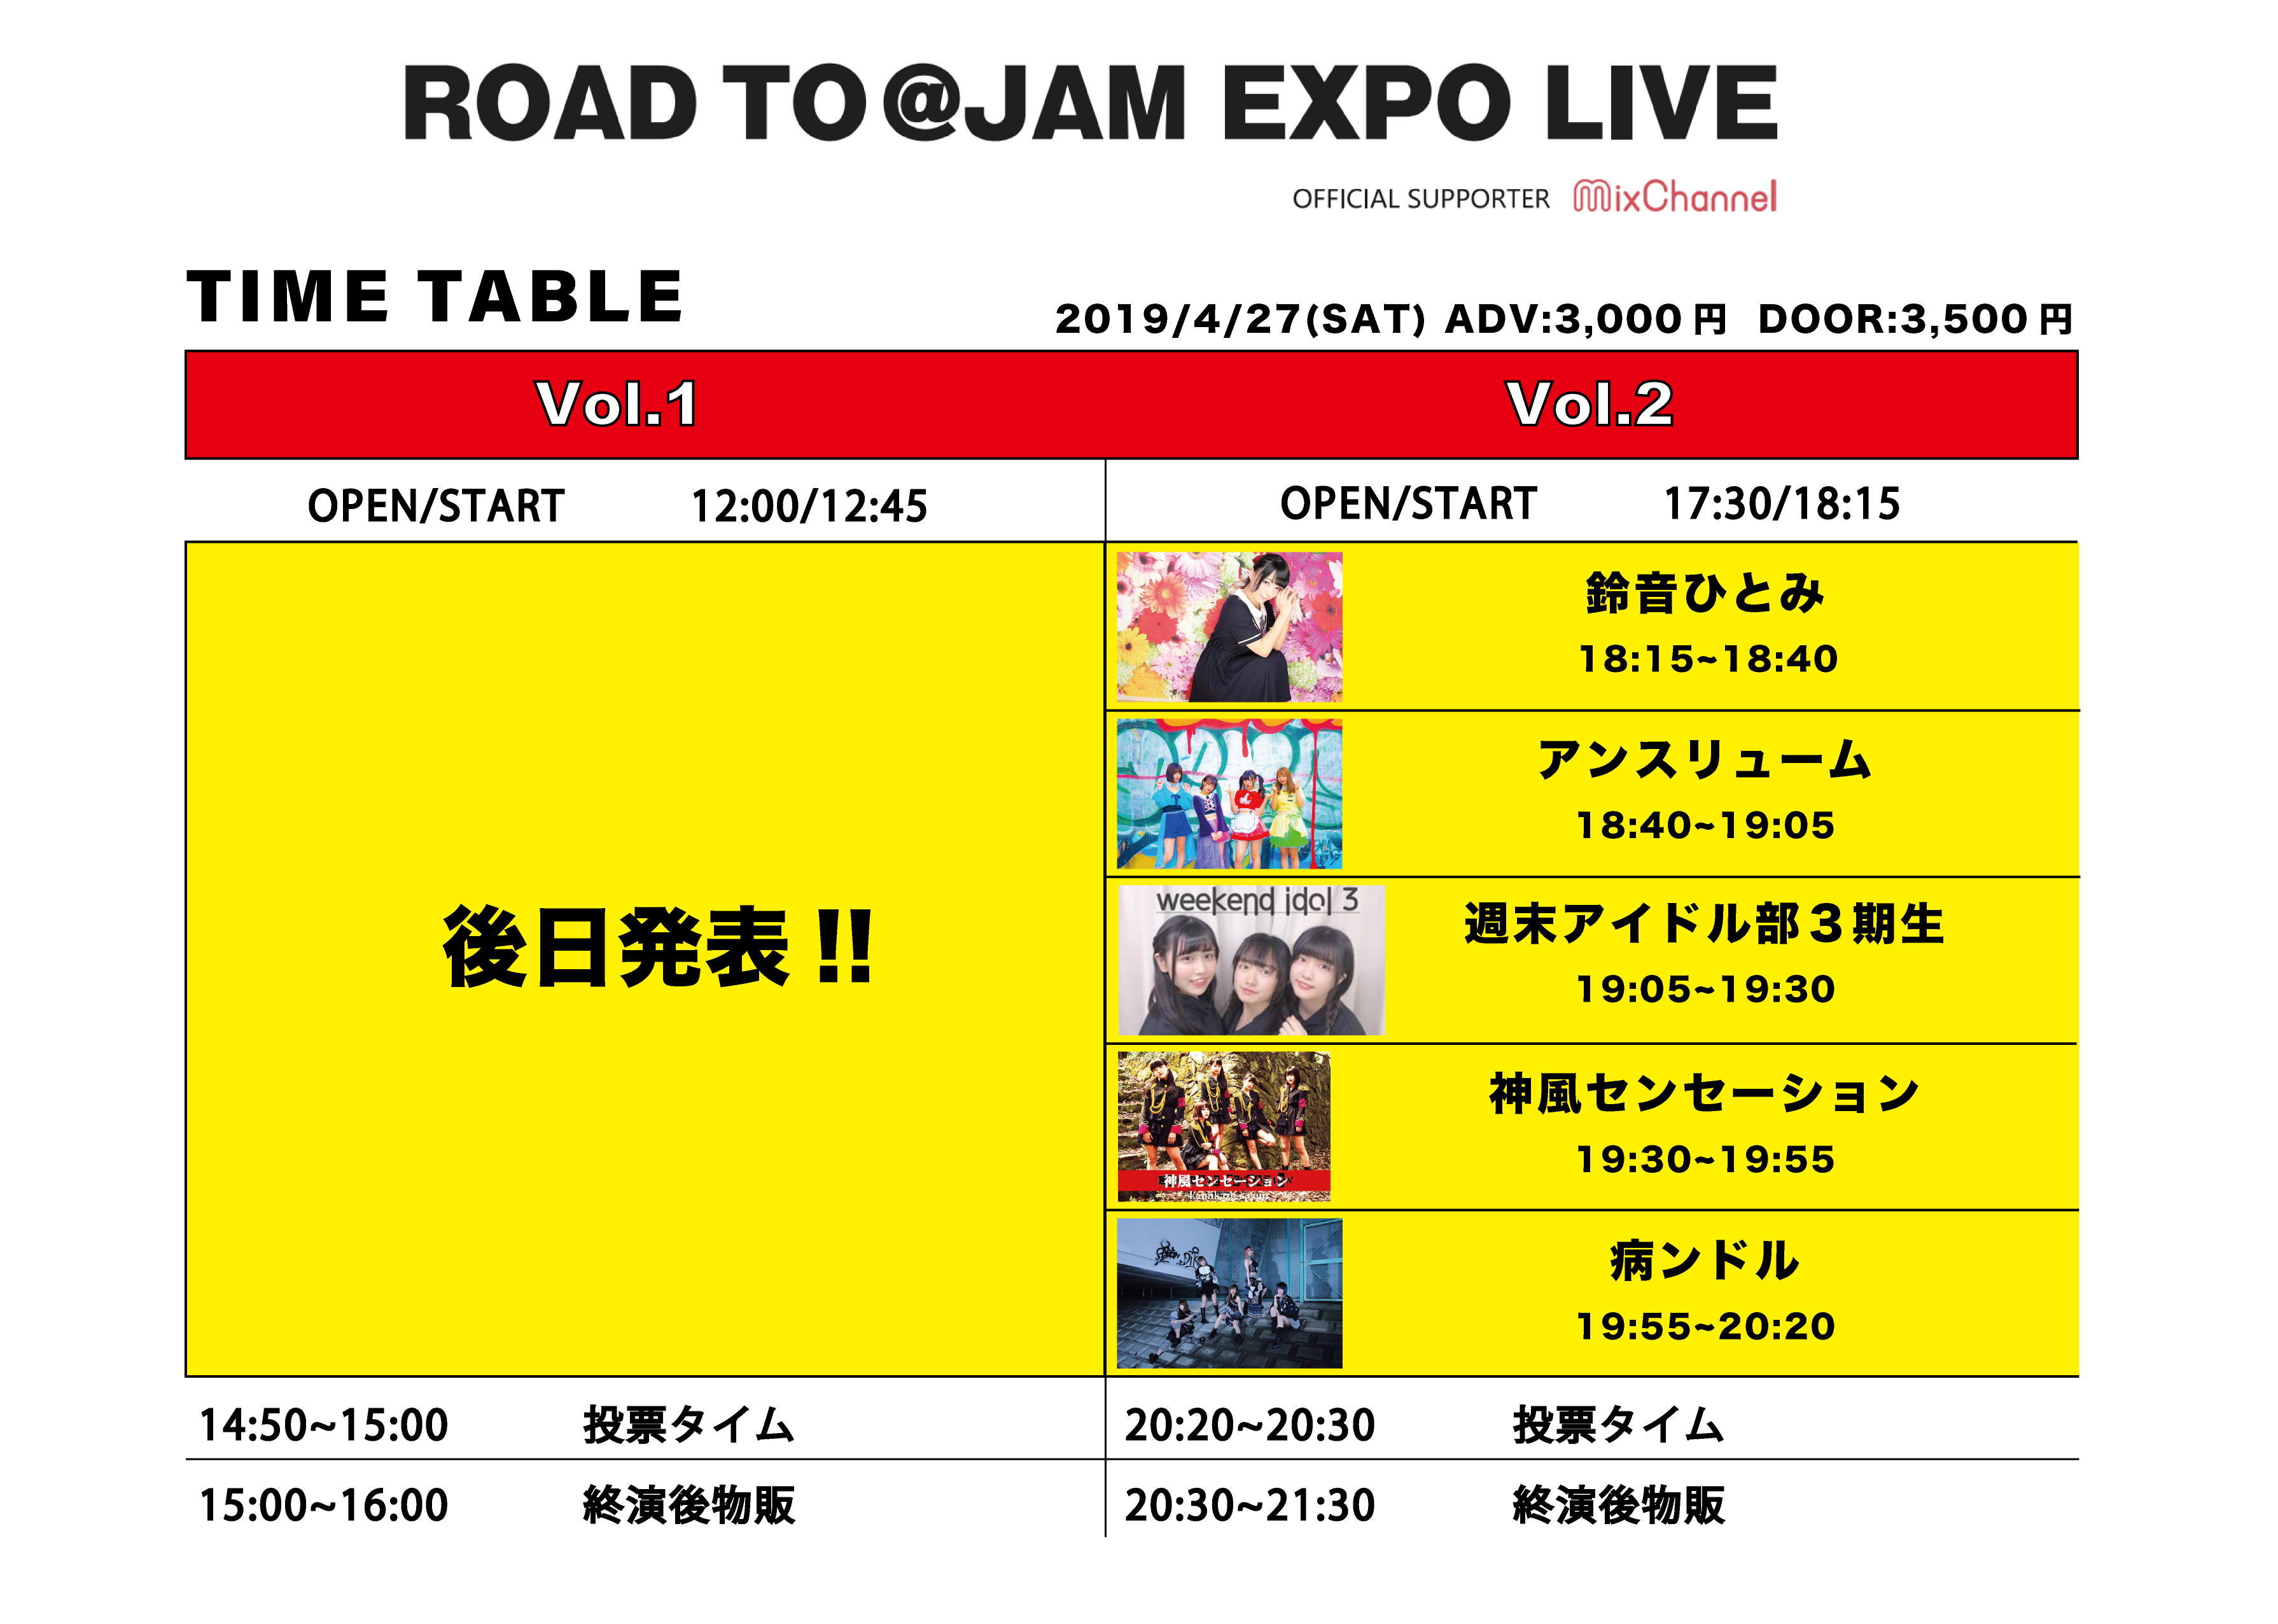 ROAD TO @ JAM EXPO LIVE  Vol.2 タイムテーブル